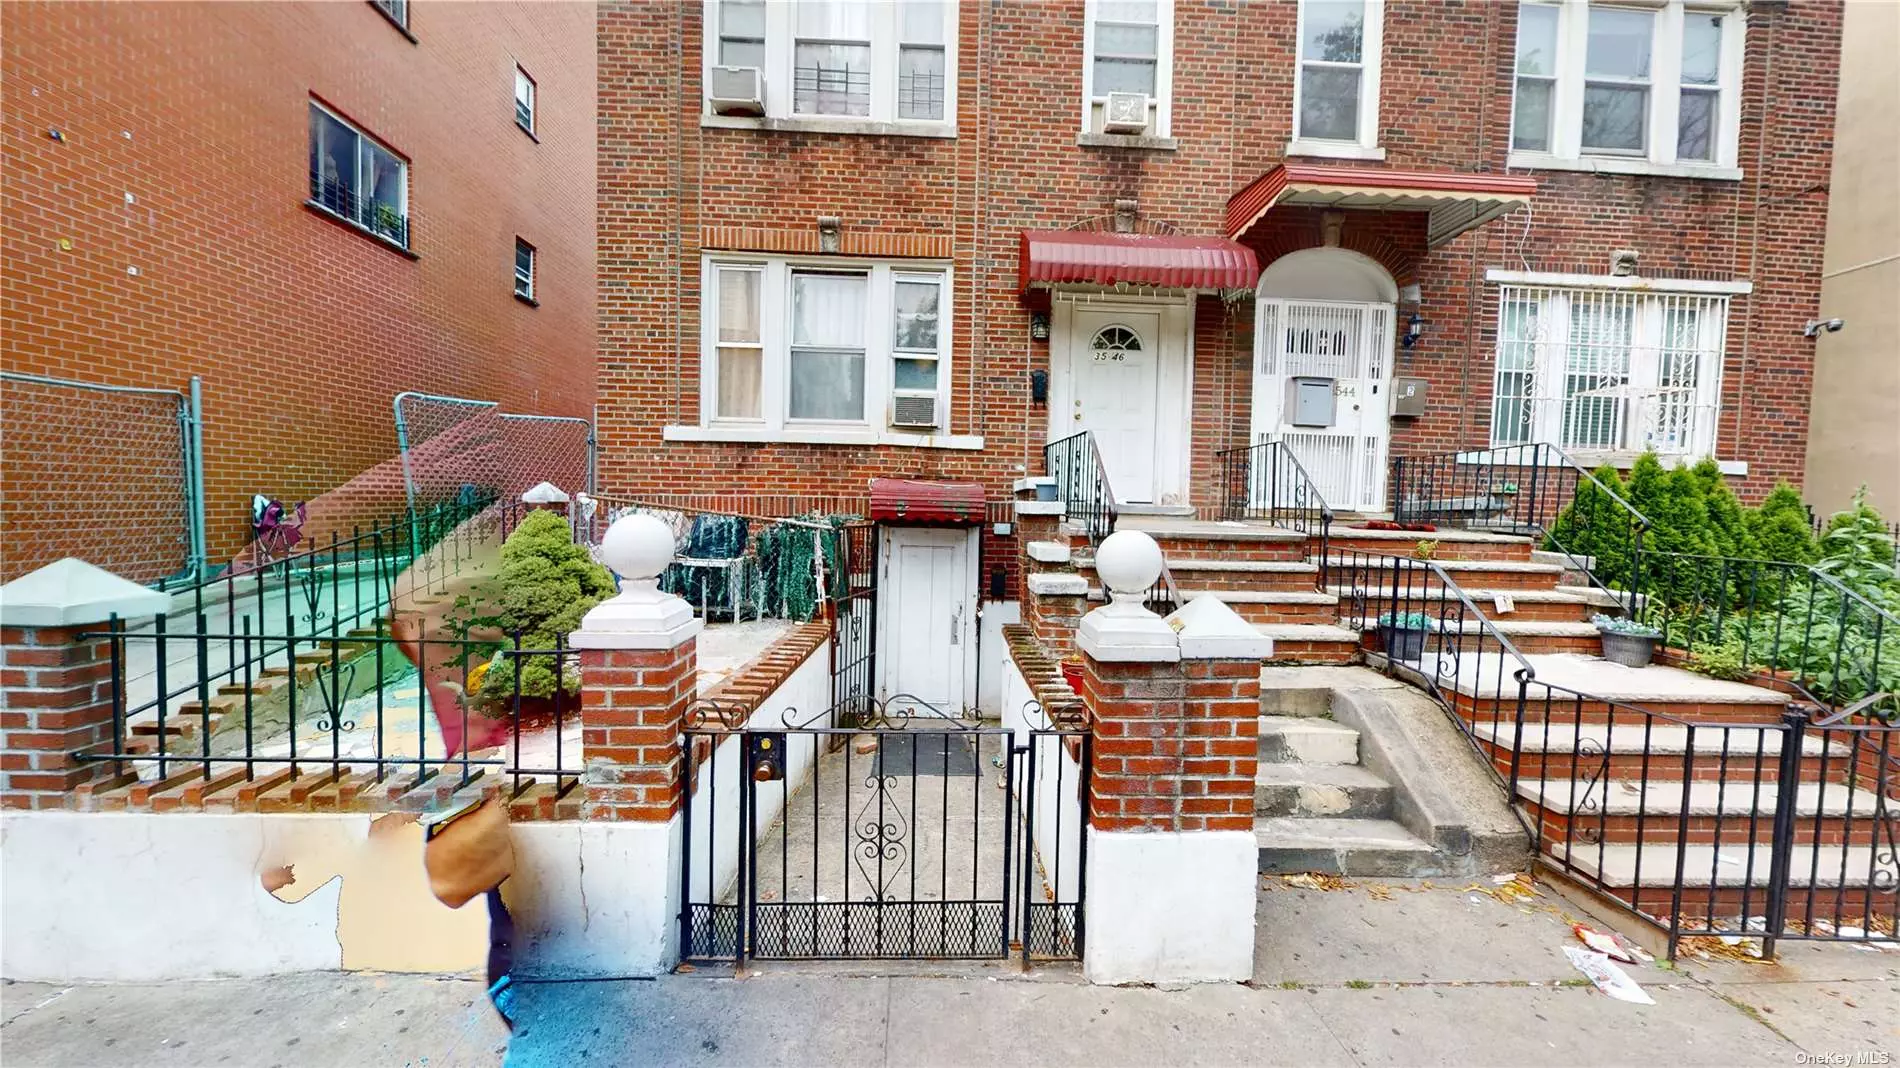 Big building with Basement legal for Offices, 3 Bedrooms apartment in 1st fl,  4 bedroom apartment on 2nd Floor Can be delivered Vacant, 1 Block to Roosevelt Ave. 3 Blocks to Junction Blvd. 2 Car garage with a Private driveway for 4 cars High Potential Income